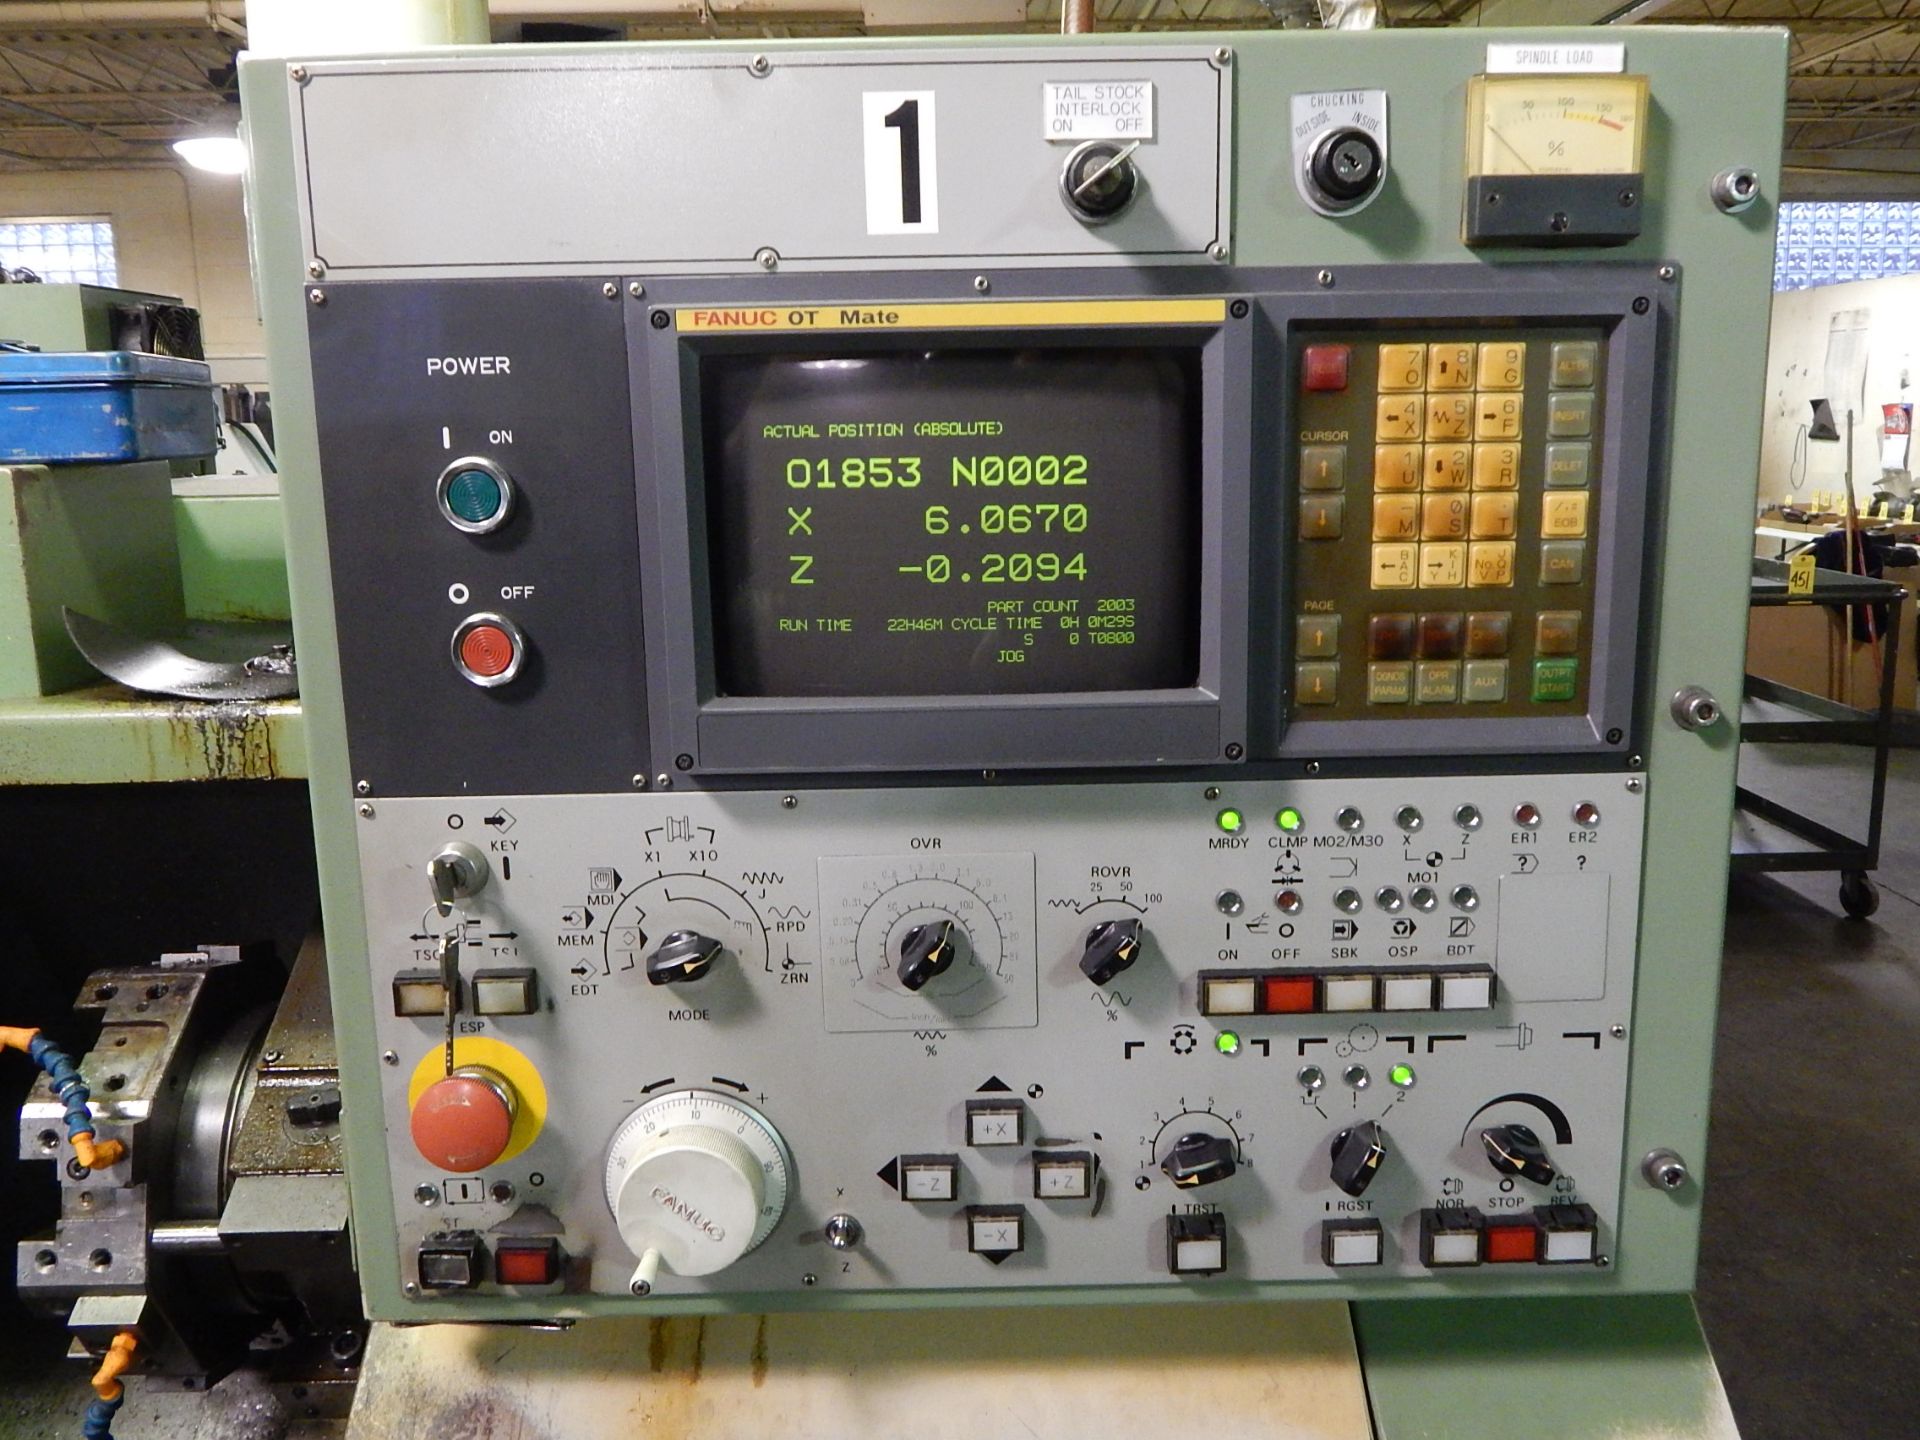 Mori-Seiki AL-20, CNC Turning Center, s/n 2796, 8 In. 3-Jaw Chuck, 8 Station Turret, Tailstock, - Image 5 of 12